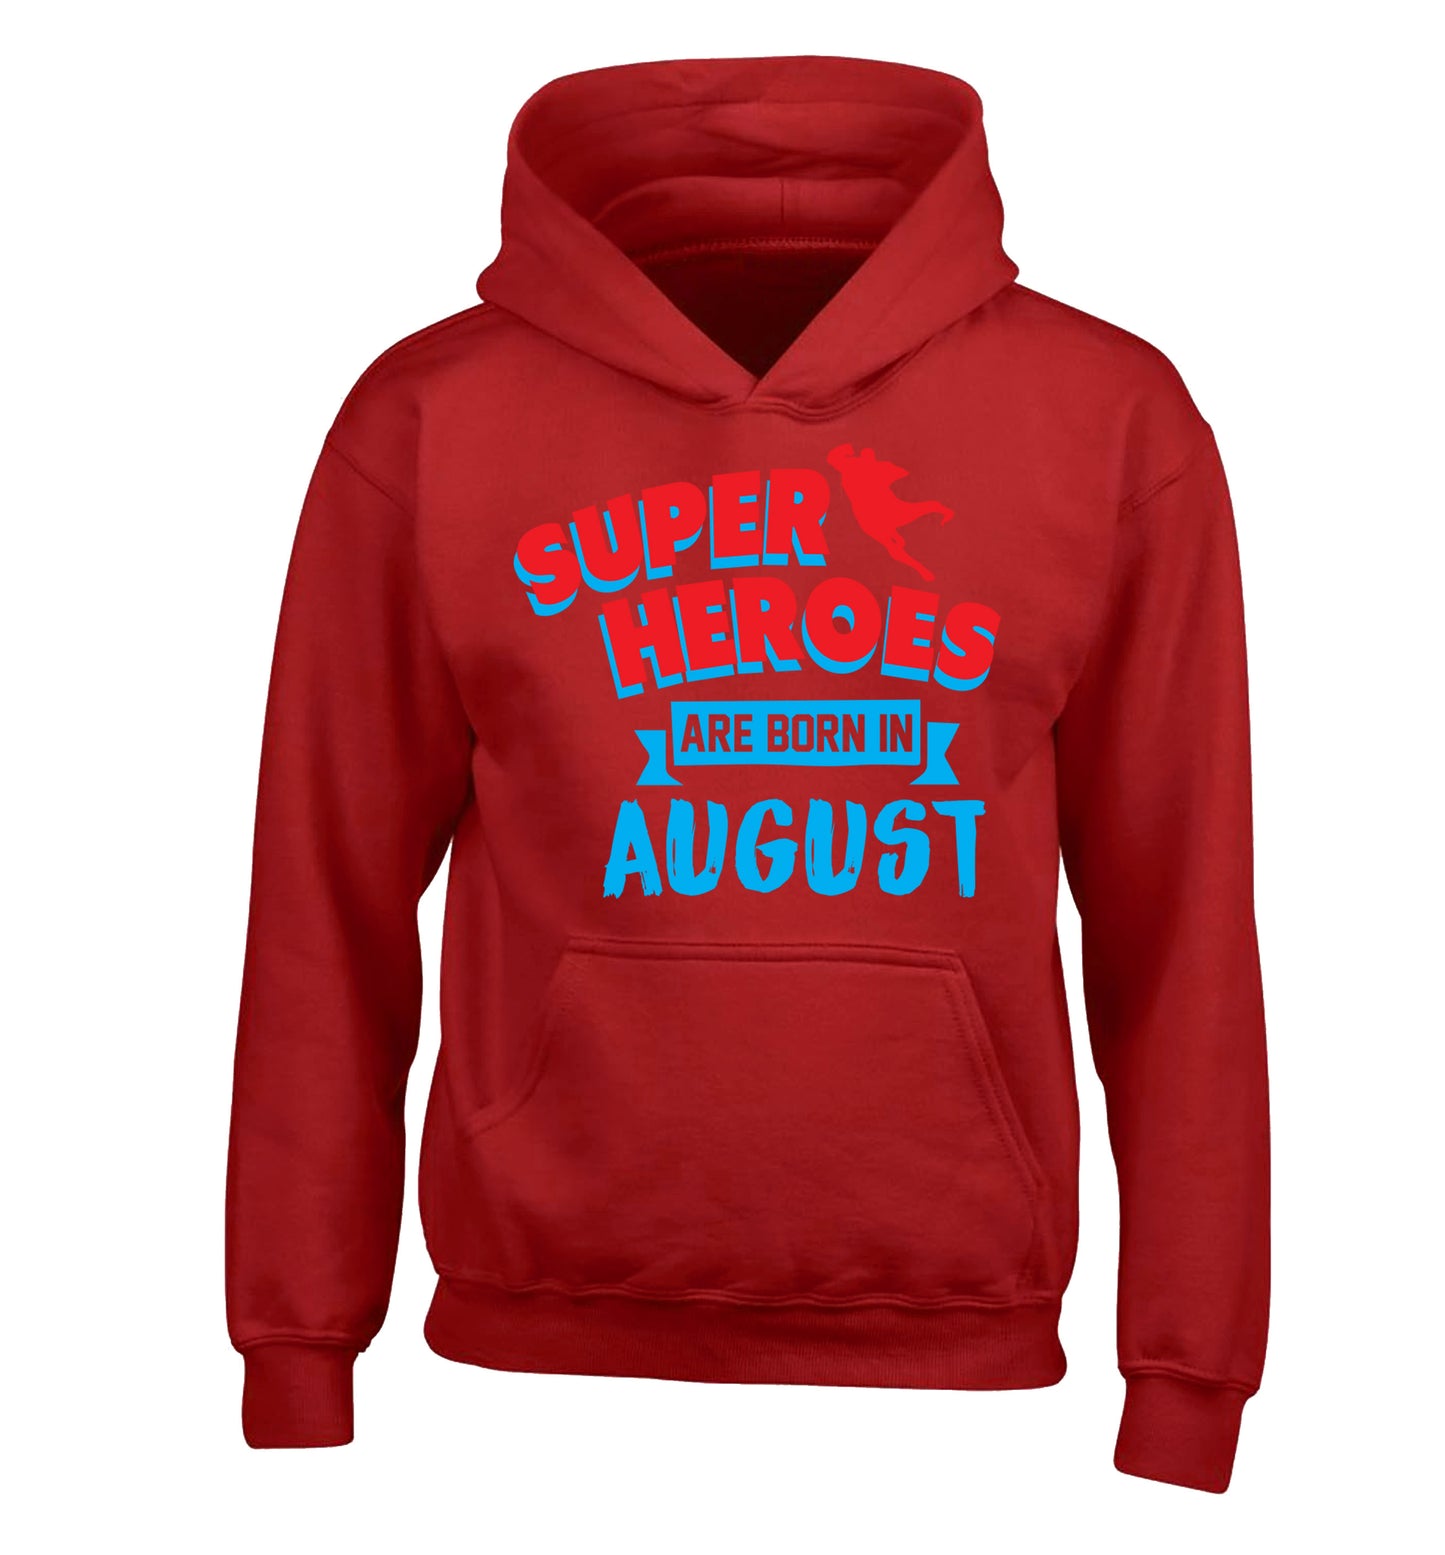 Superheroes are born in August children's red hoodie 12-13 Years